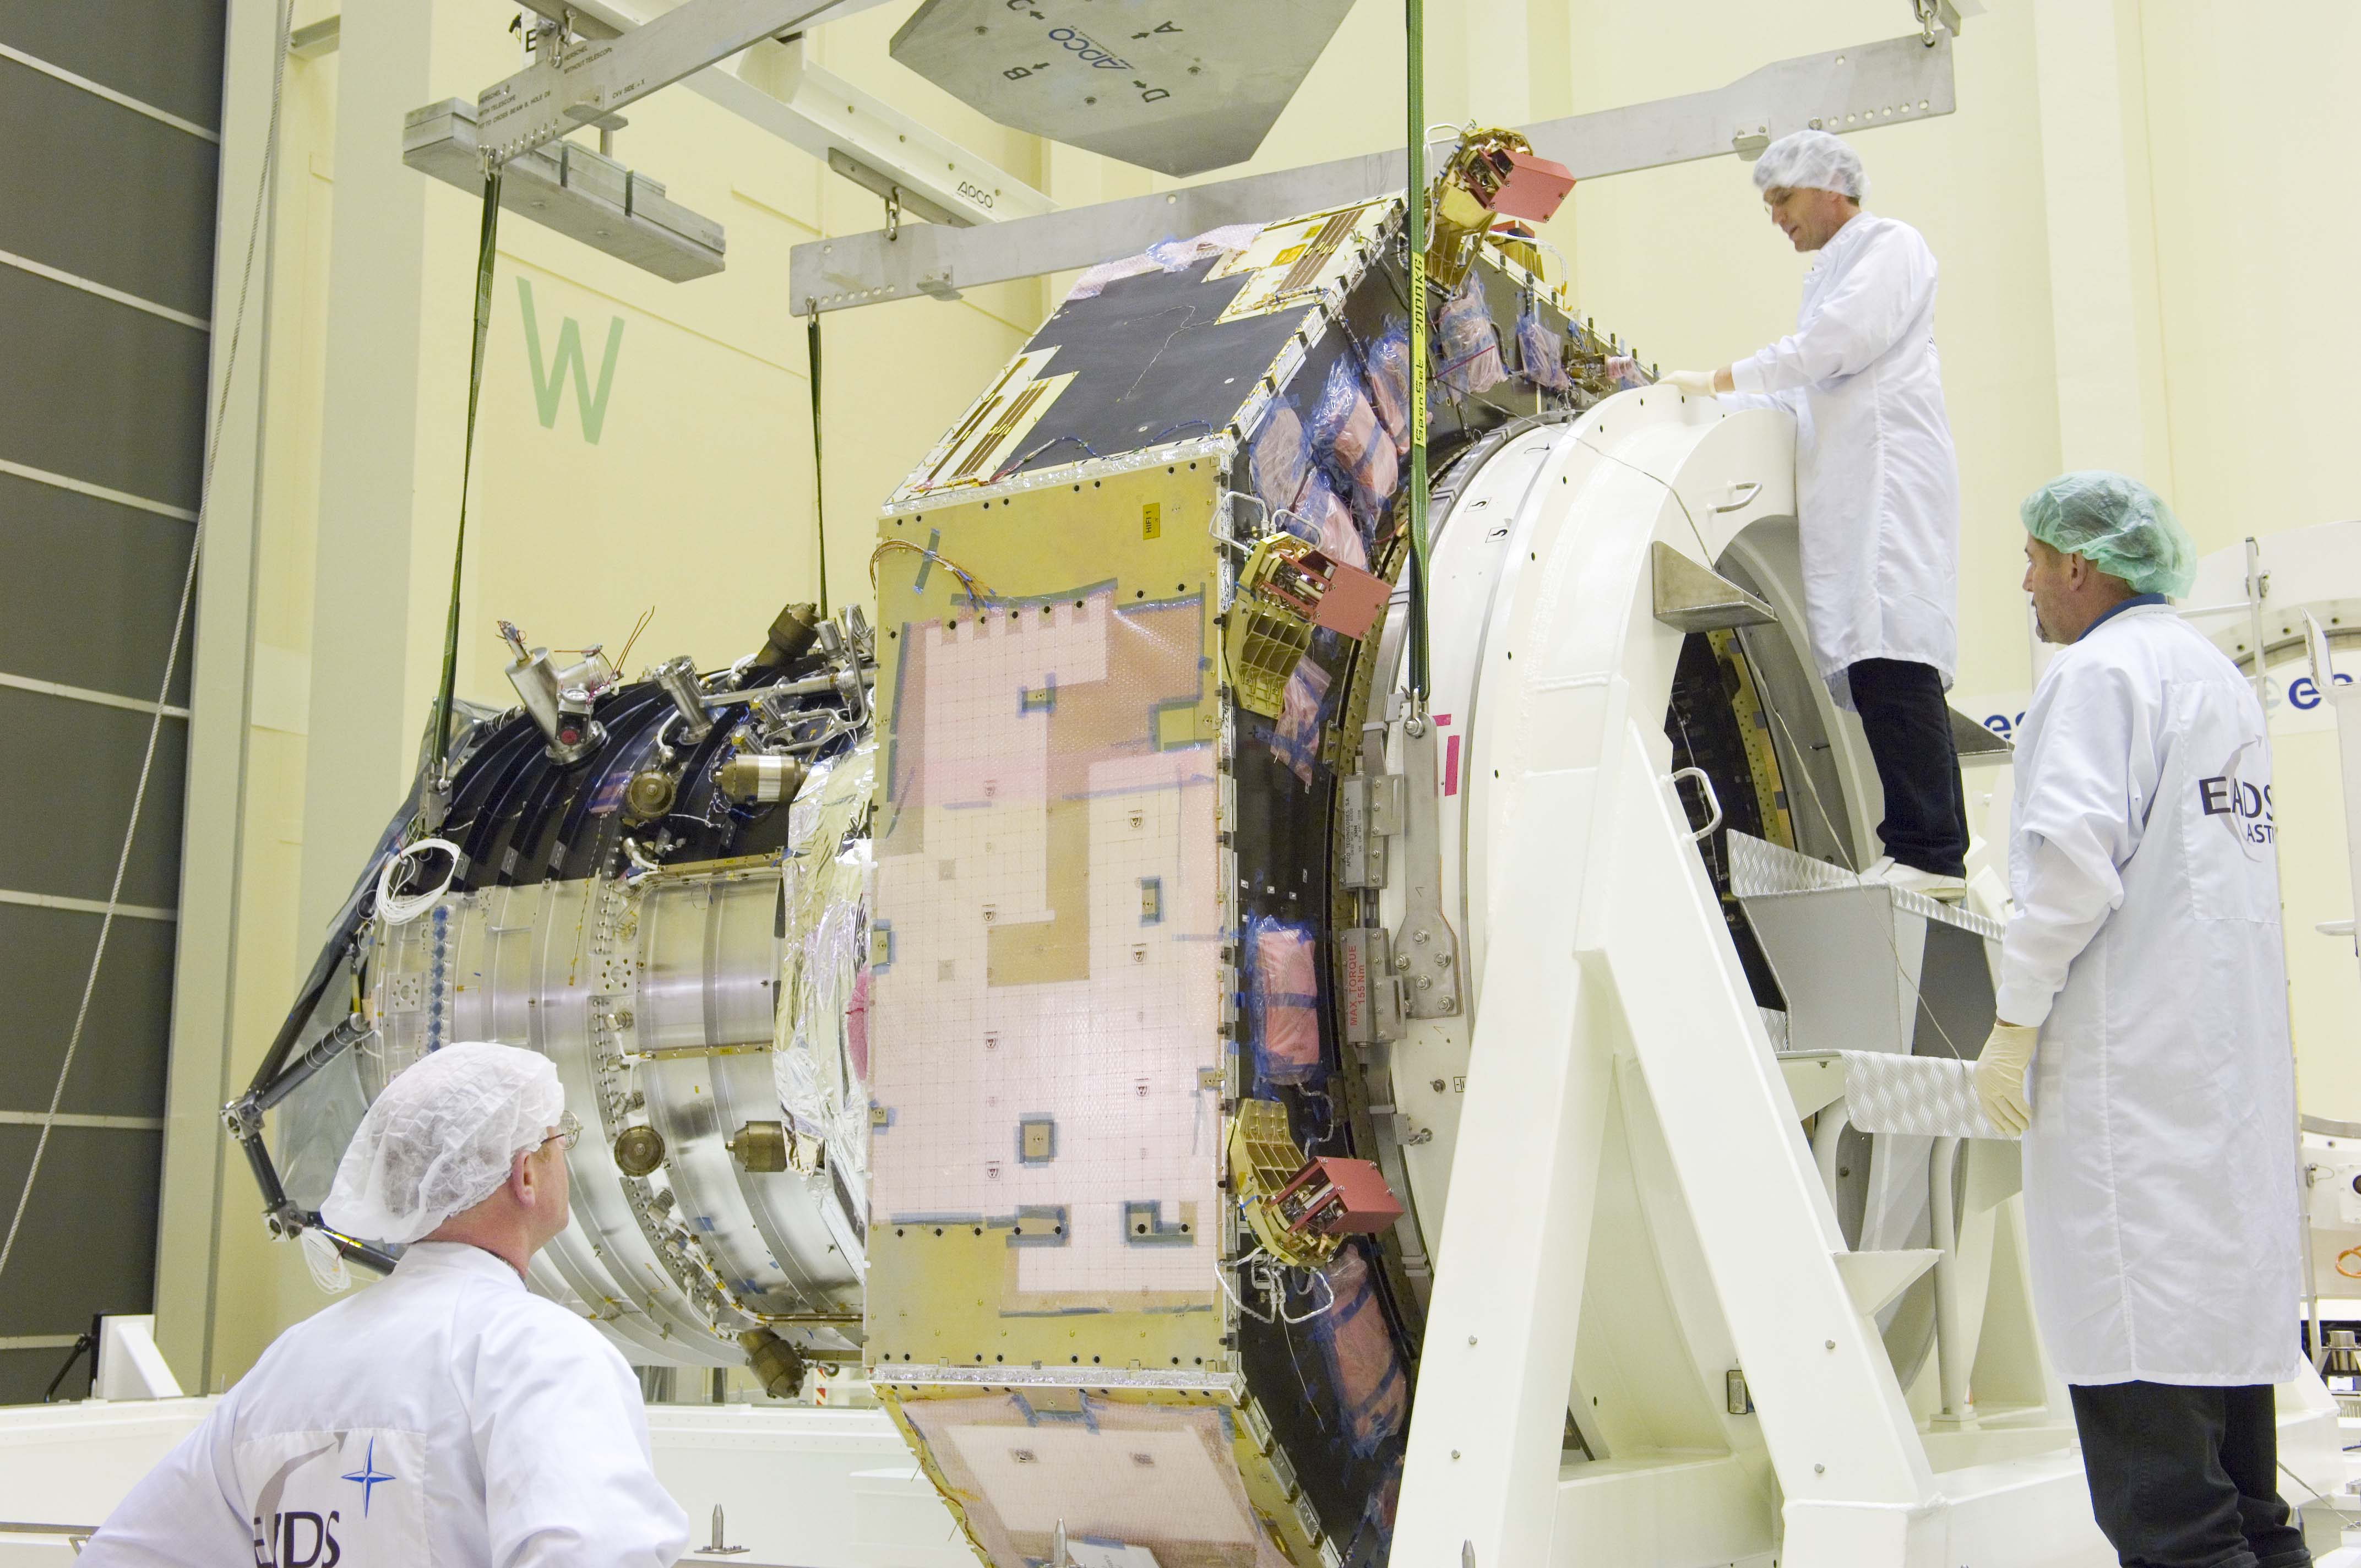 The Herschel Flight Model spacecraft is prepared for being lifted from its transport container.